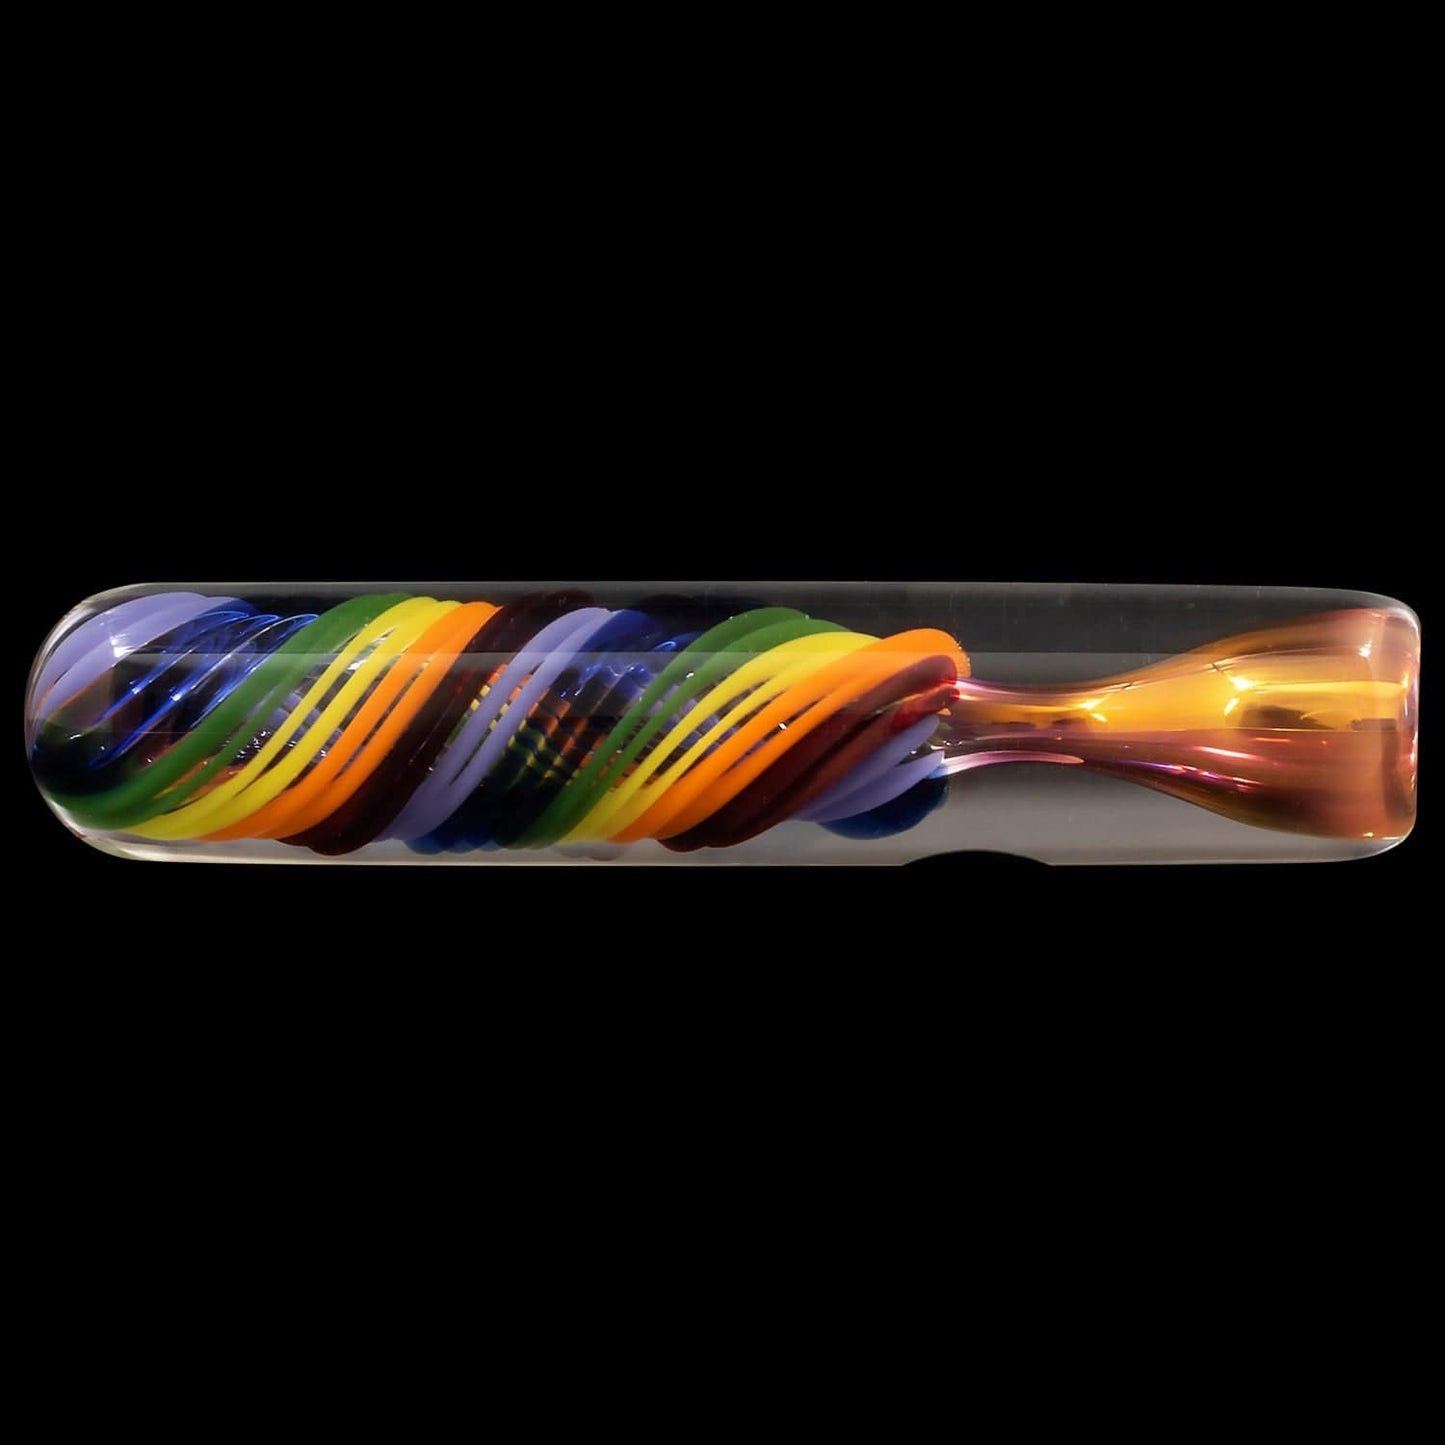 LA Pipes Hand Pipe "Twisted Rainbow" Fumed Glass Chillum